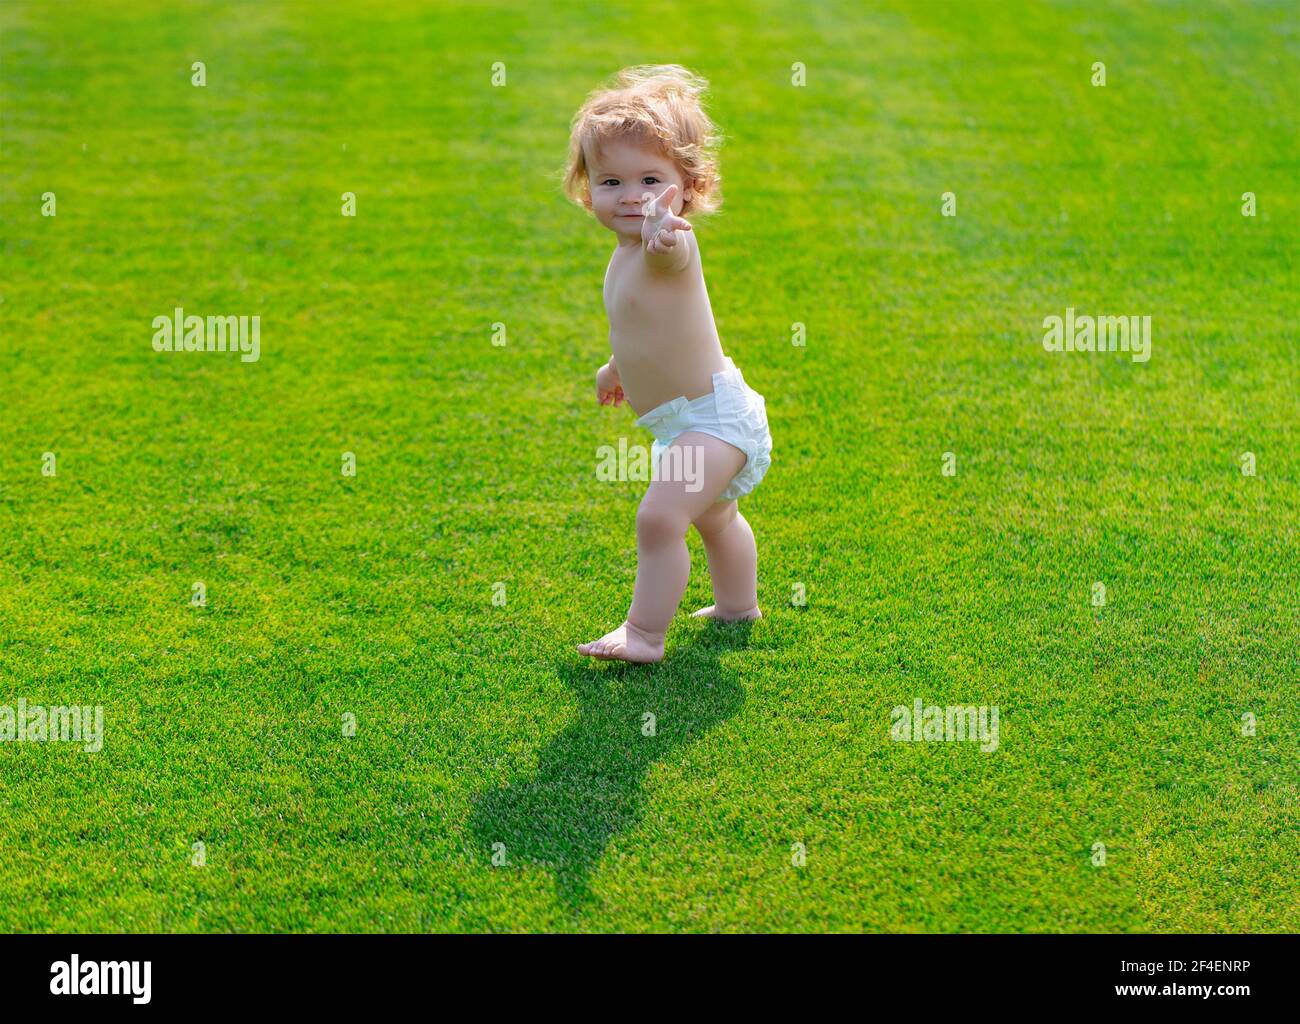 Toddler Walking Barefoot On Grass High Resolution Stock Photography and Images - Alamy